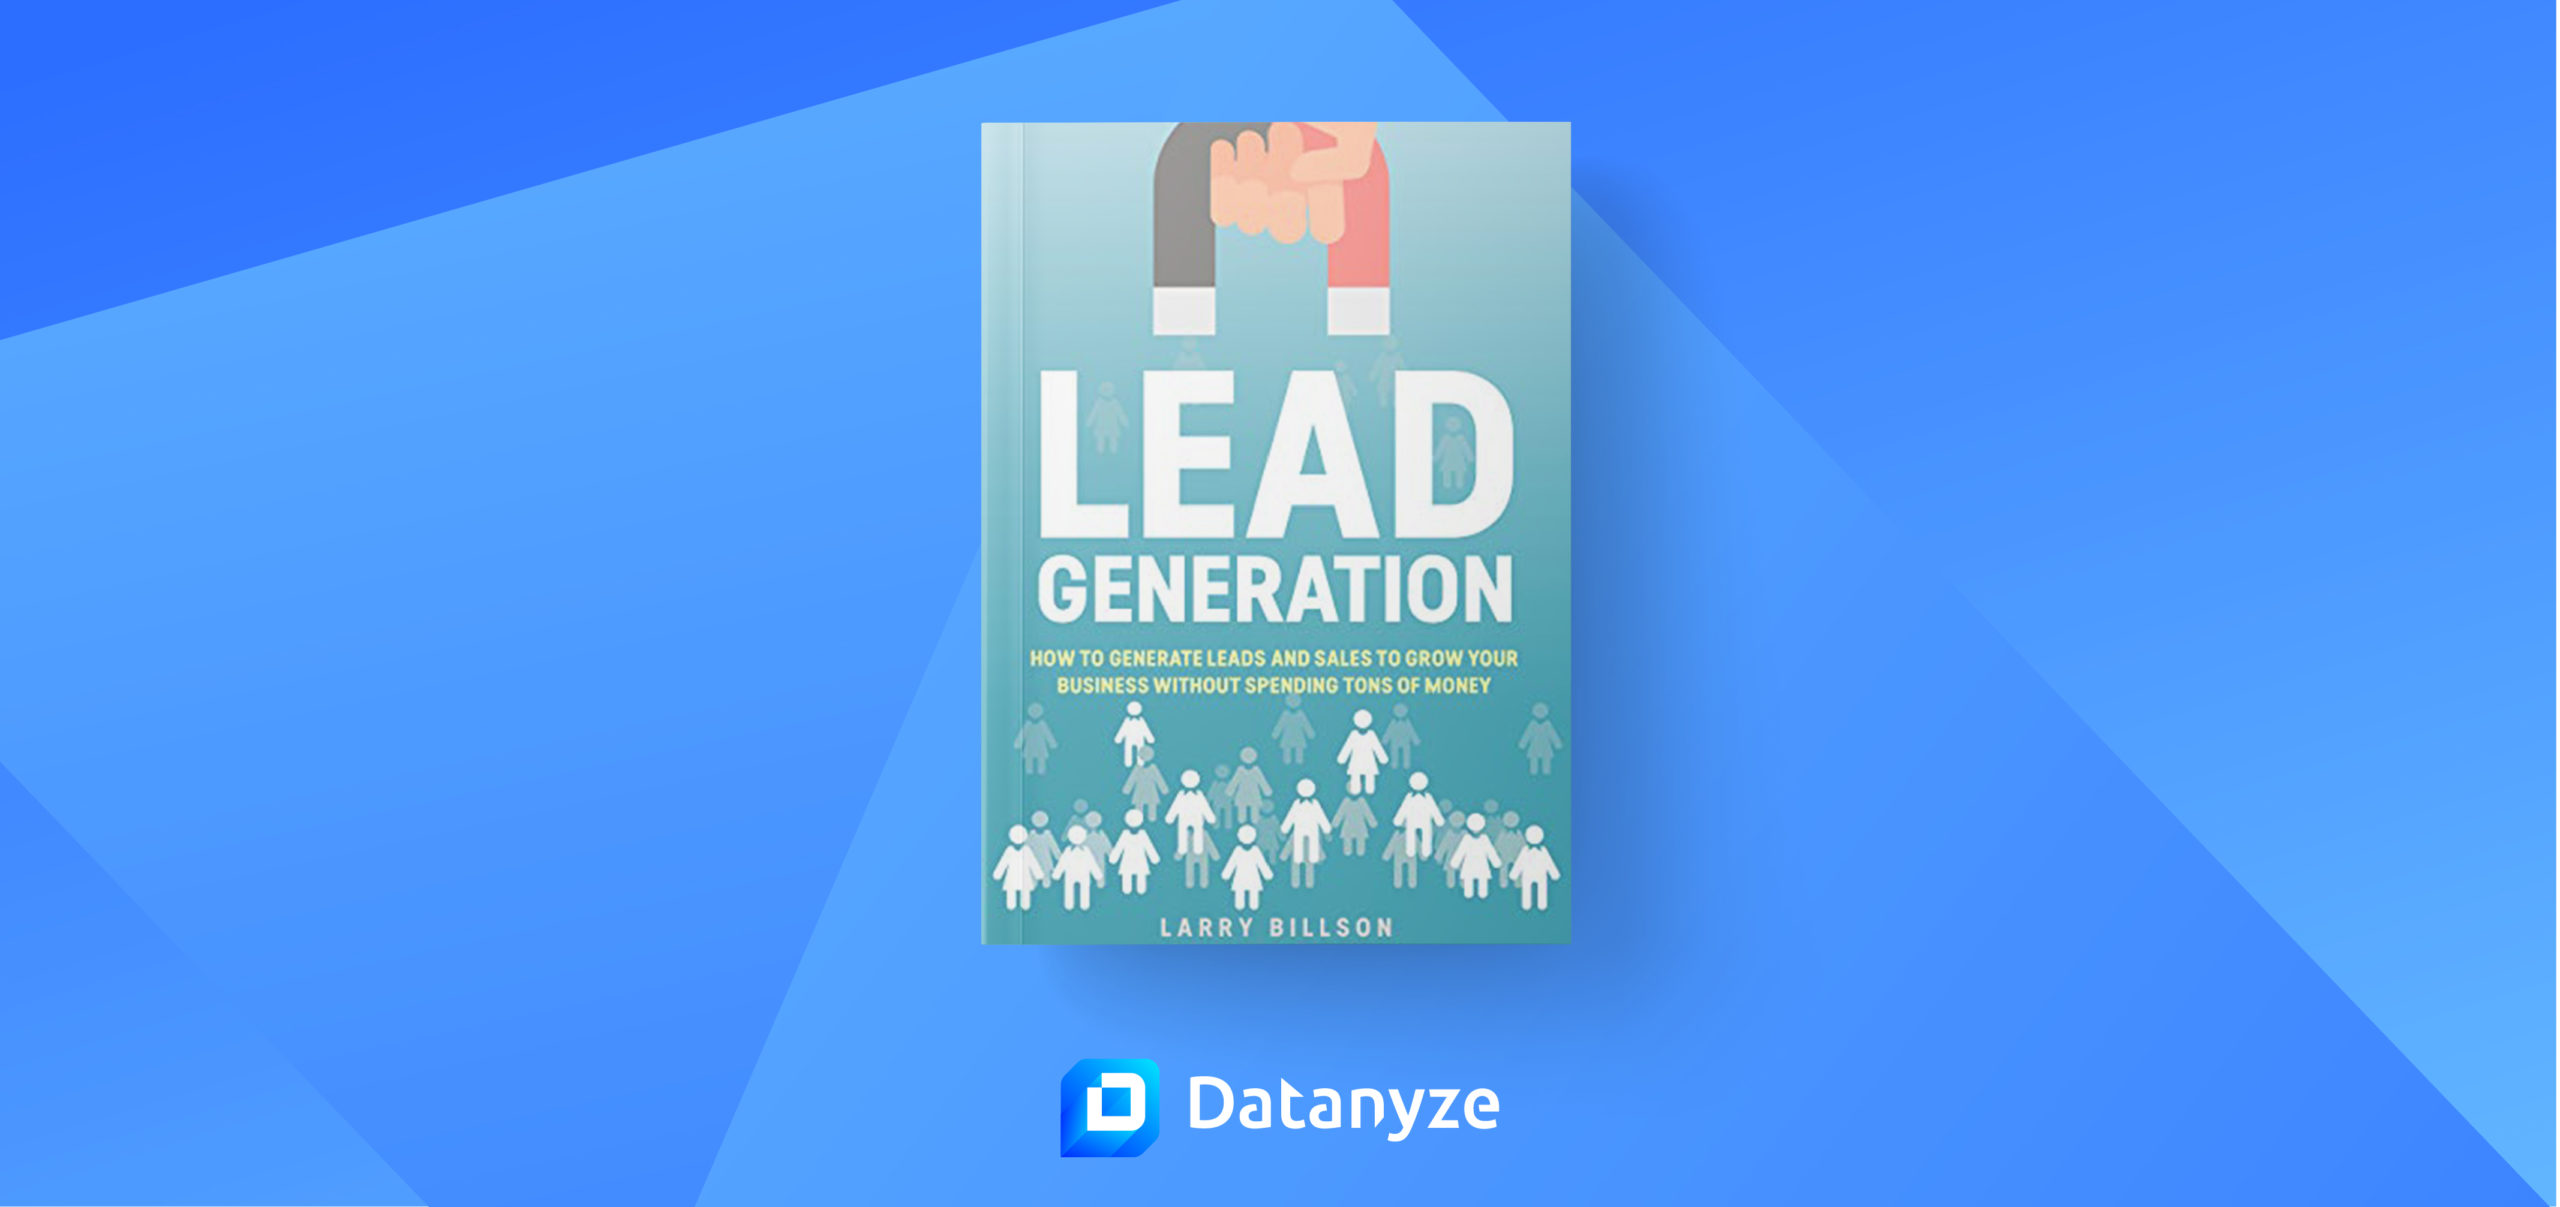 Lead Generation: How to Generate Leads and Sales to Grow Your Business Without Spending Tons of Money